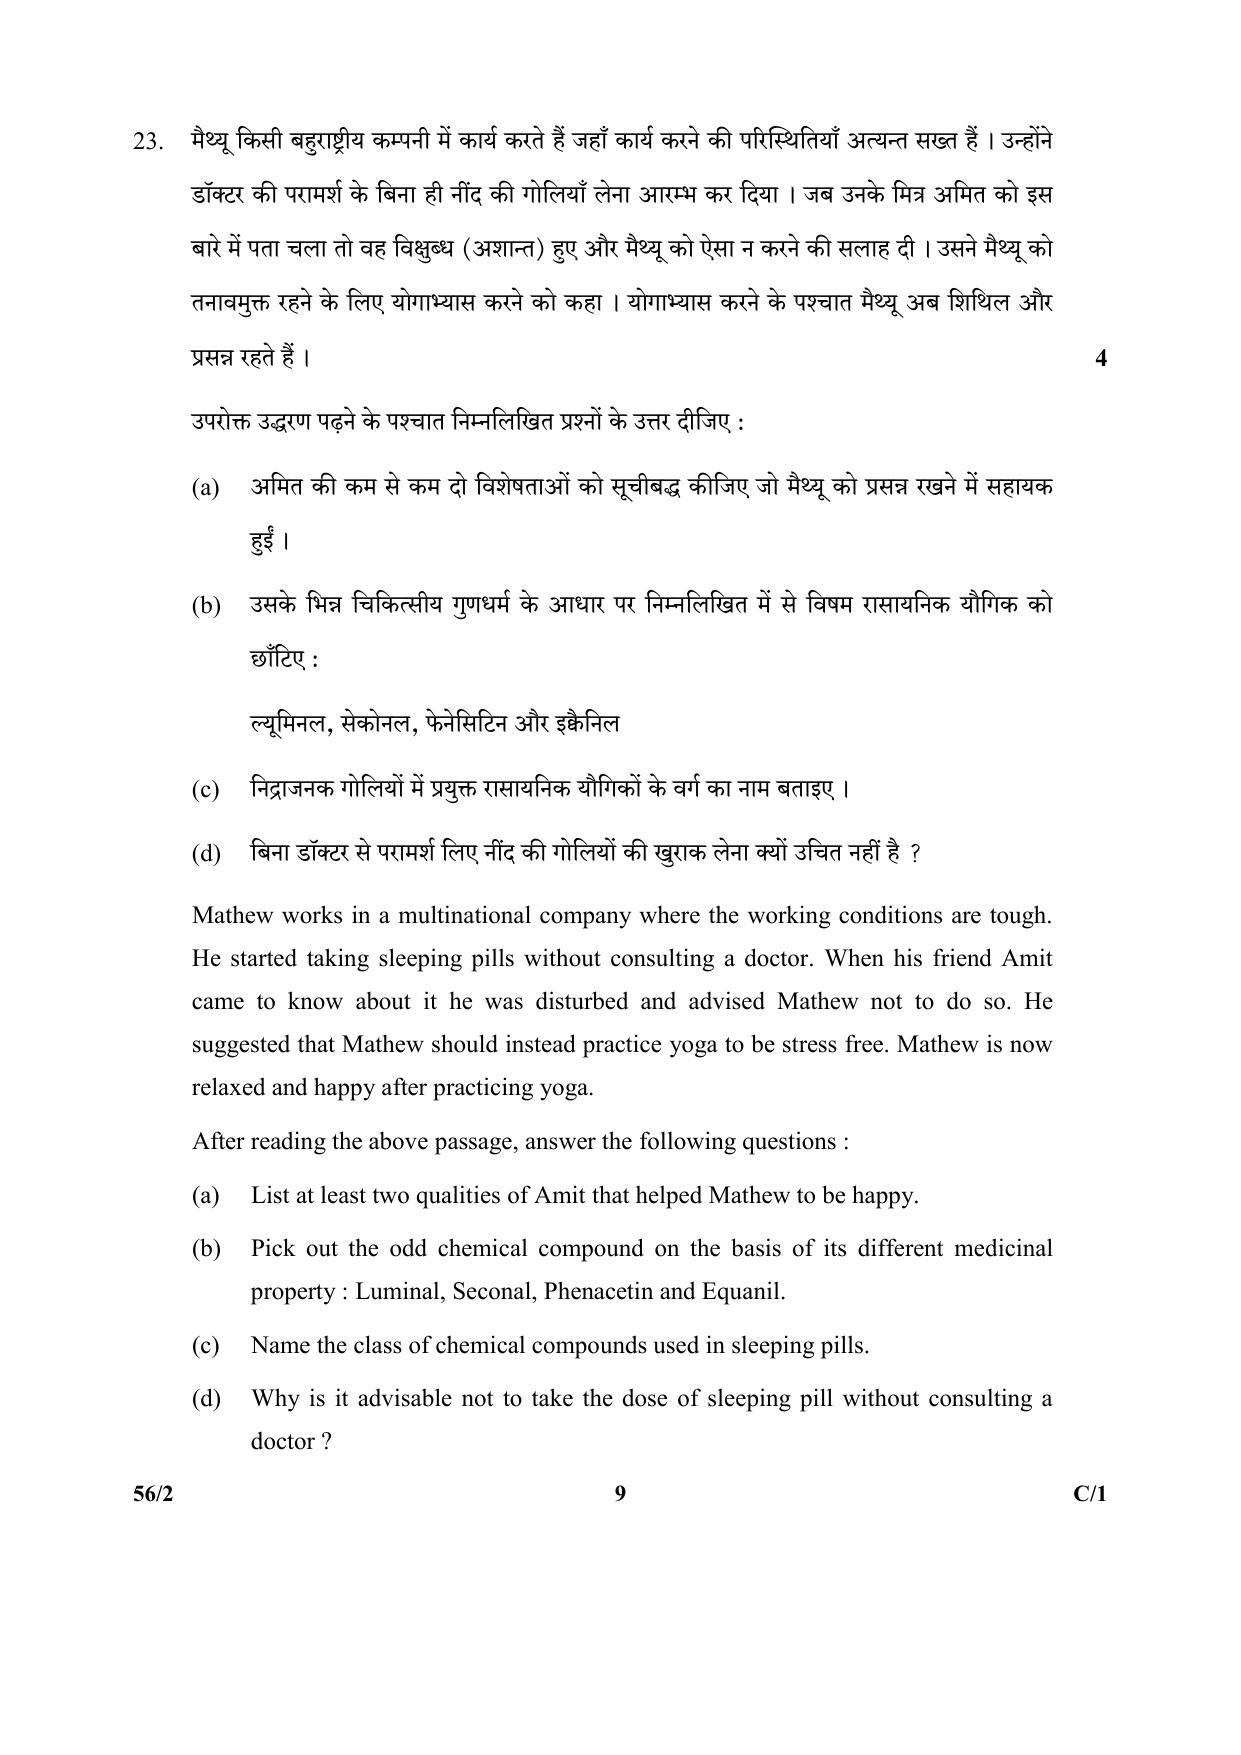 CBSE Class 12 56-2 (Chemistry) 2018 Compartment Question Paper - Page 9